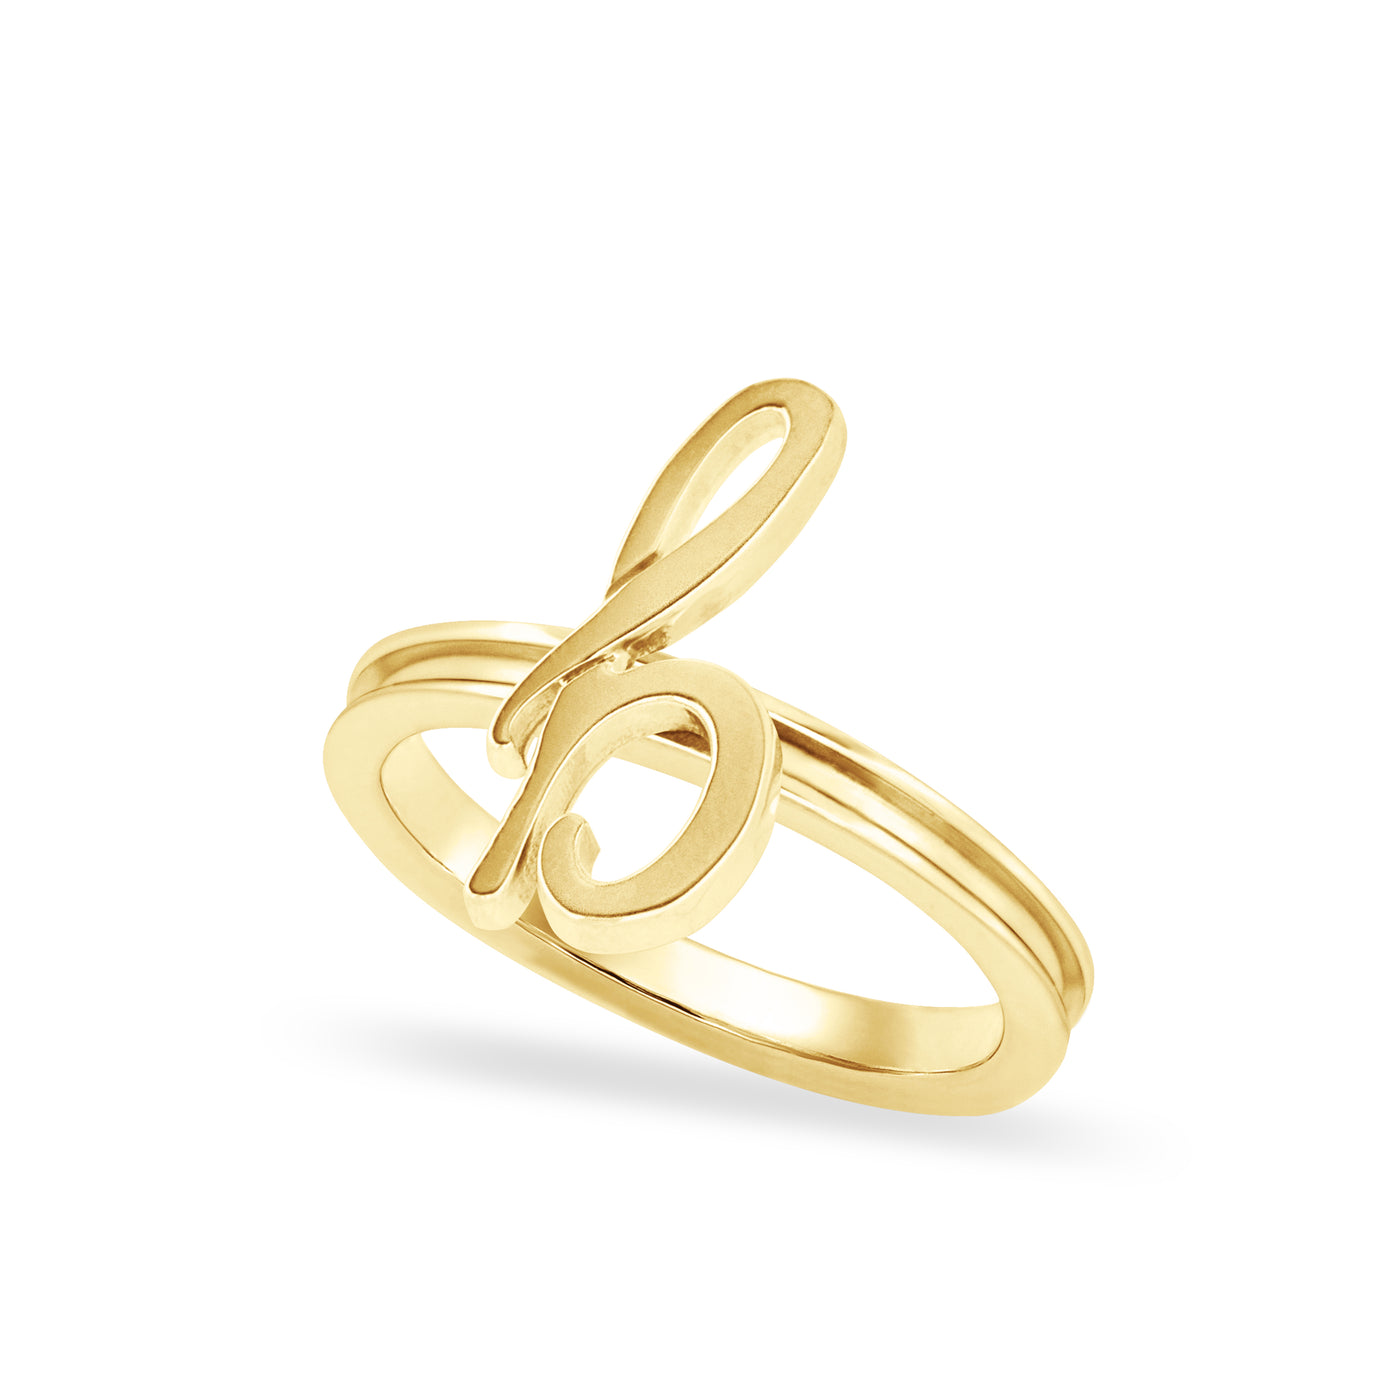 Alex Woo Autograph Ring in 14kt Yellow Gold Custom